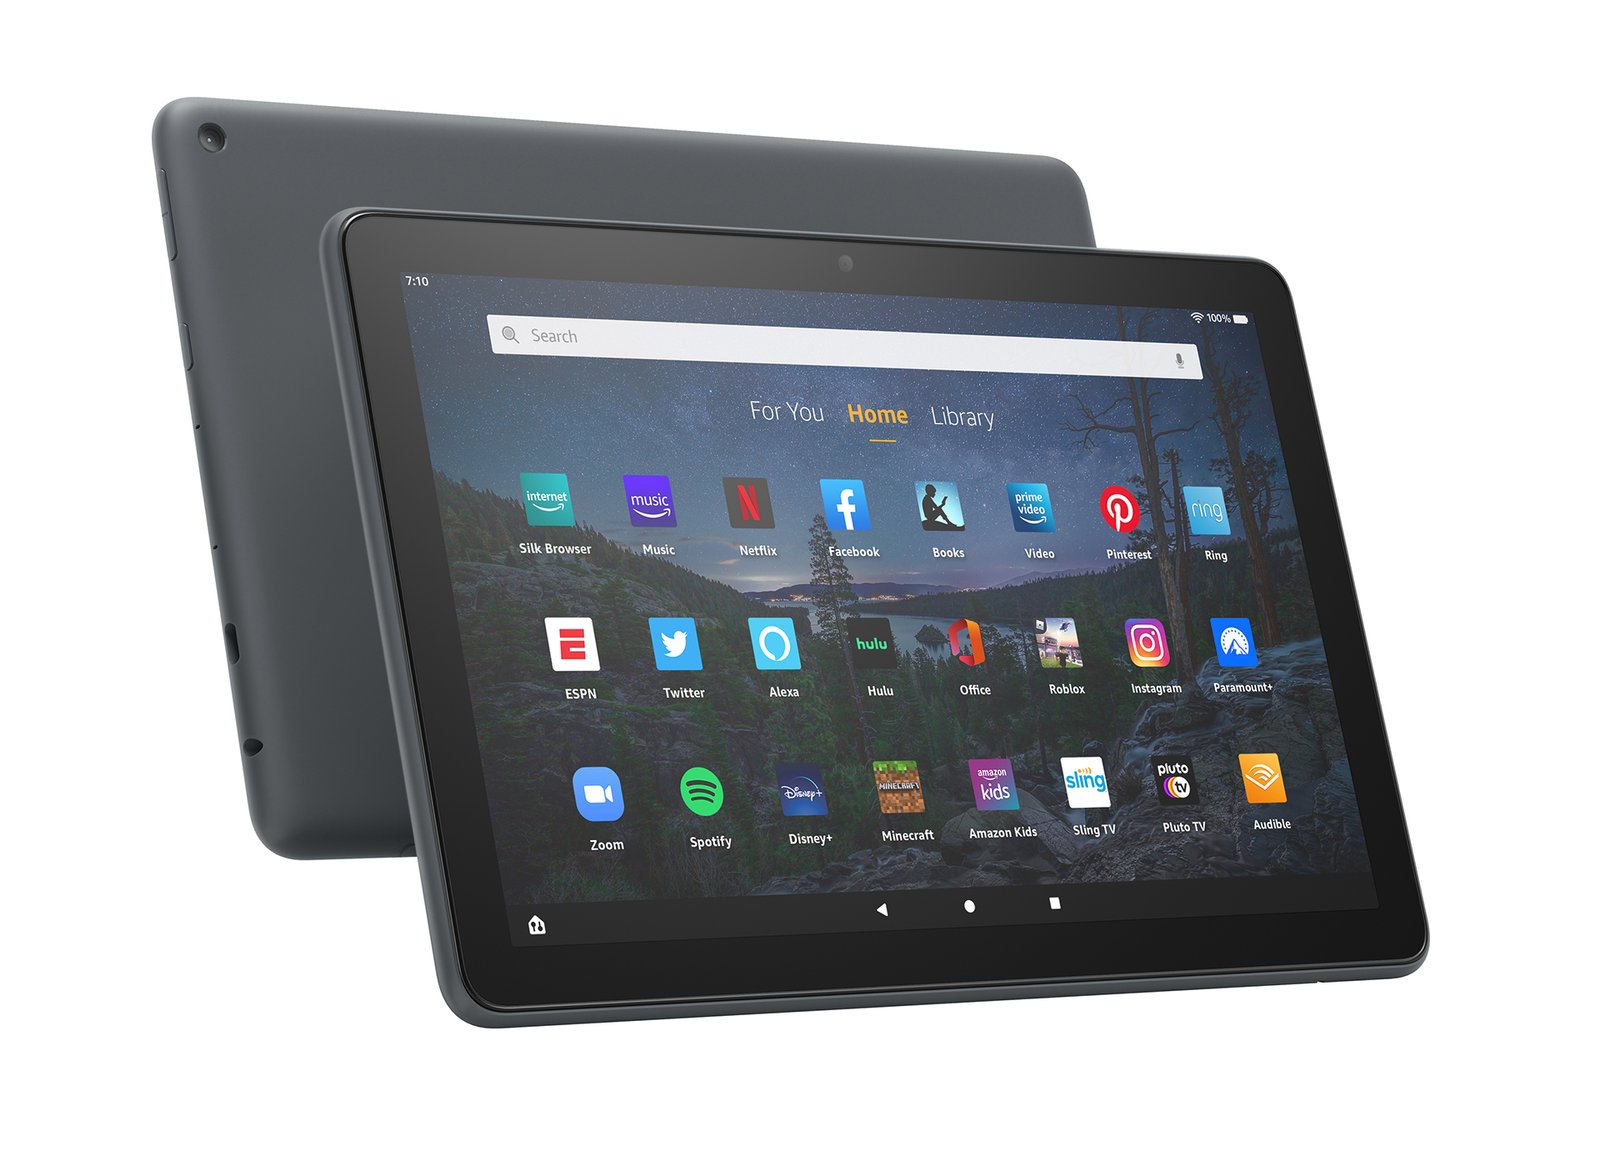 Amazon’s most up-to-date tablet sale brings the Fire HD 10 support down to $75